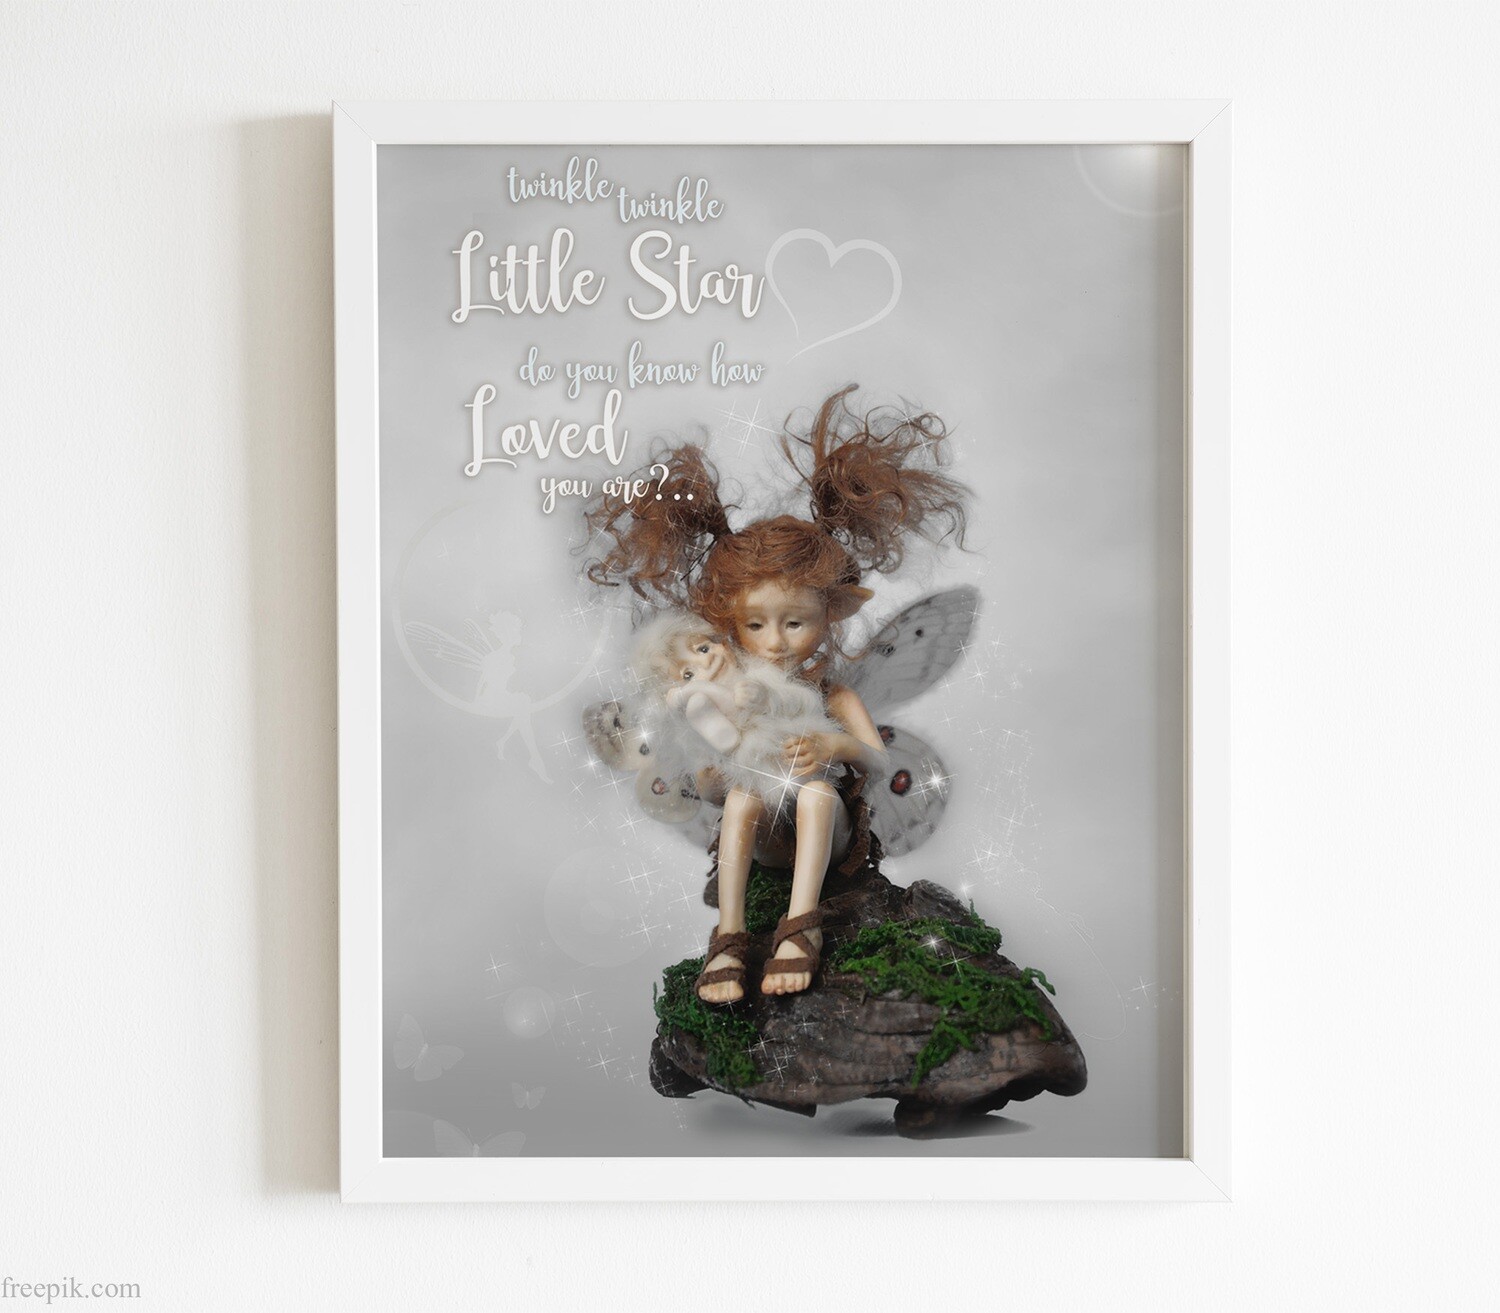 Little Fairy Digital Picture for Download, Fairy Poster for instant download, Decoration for little girl's room